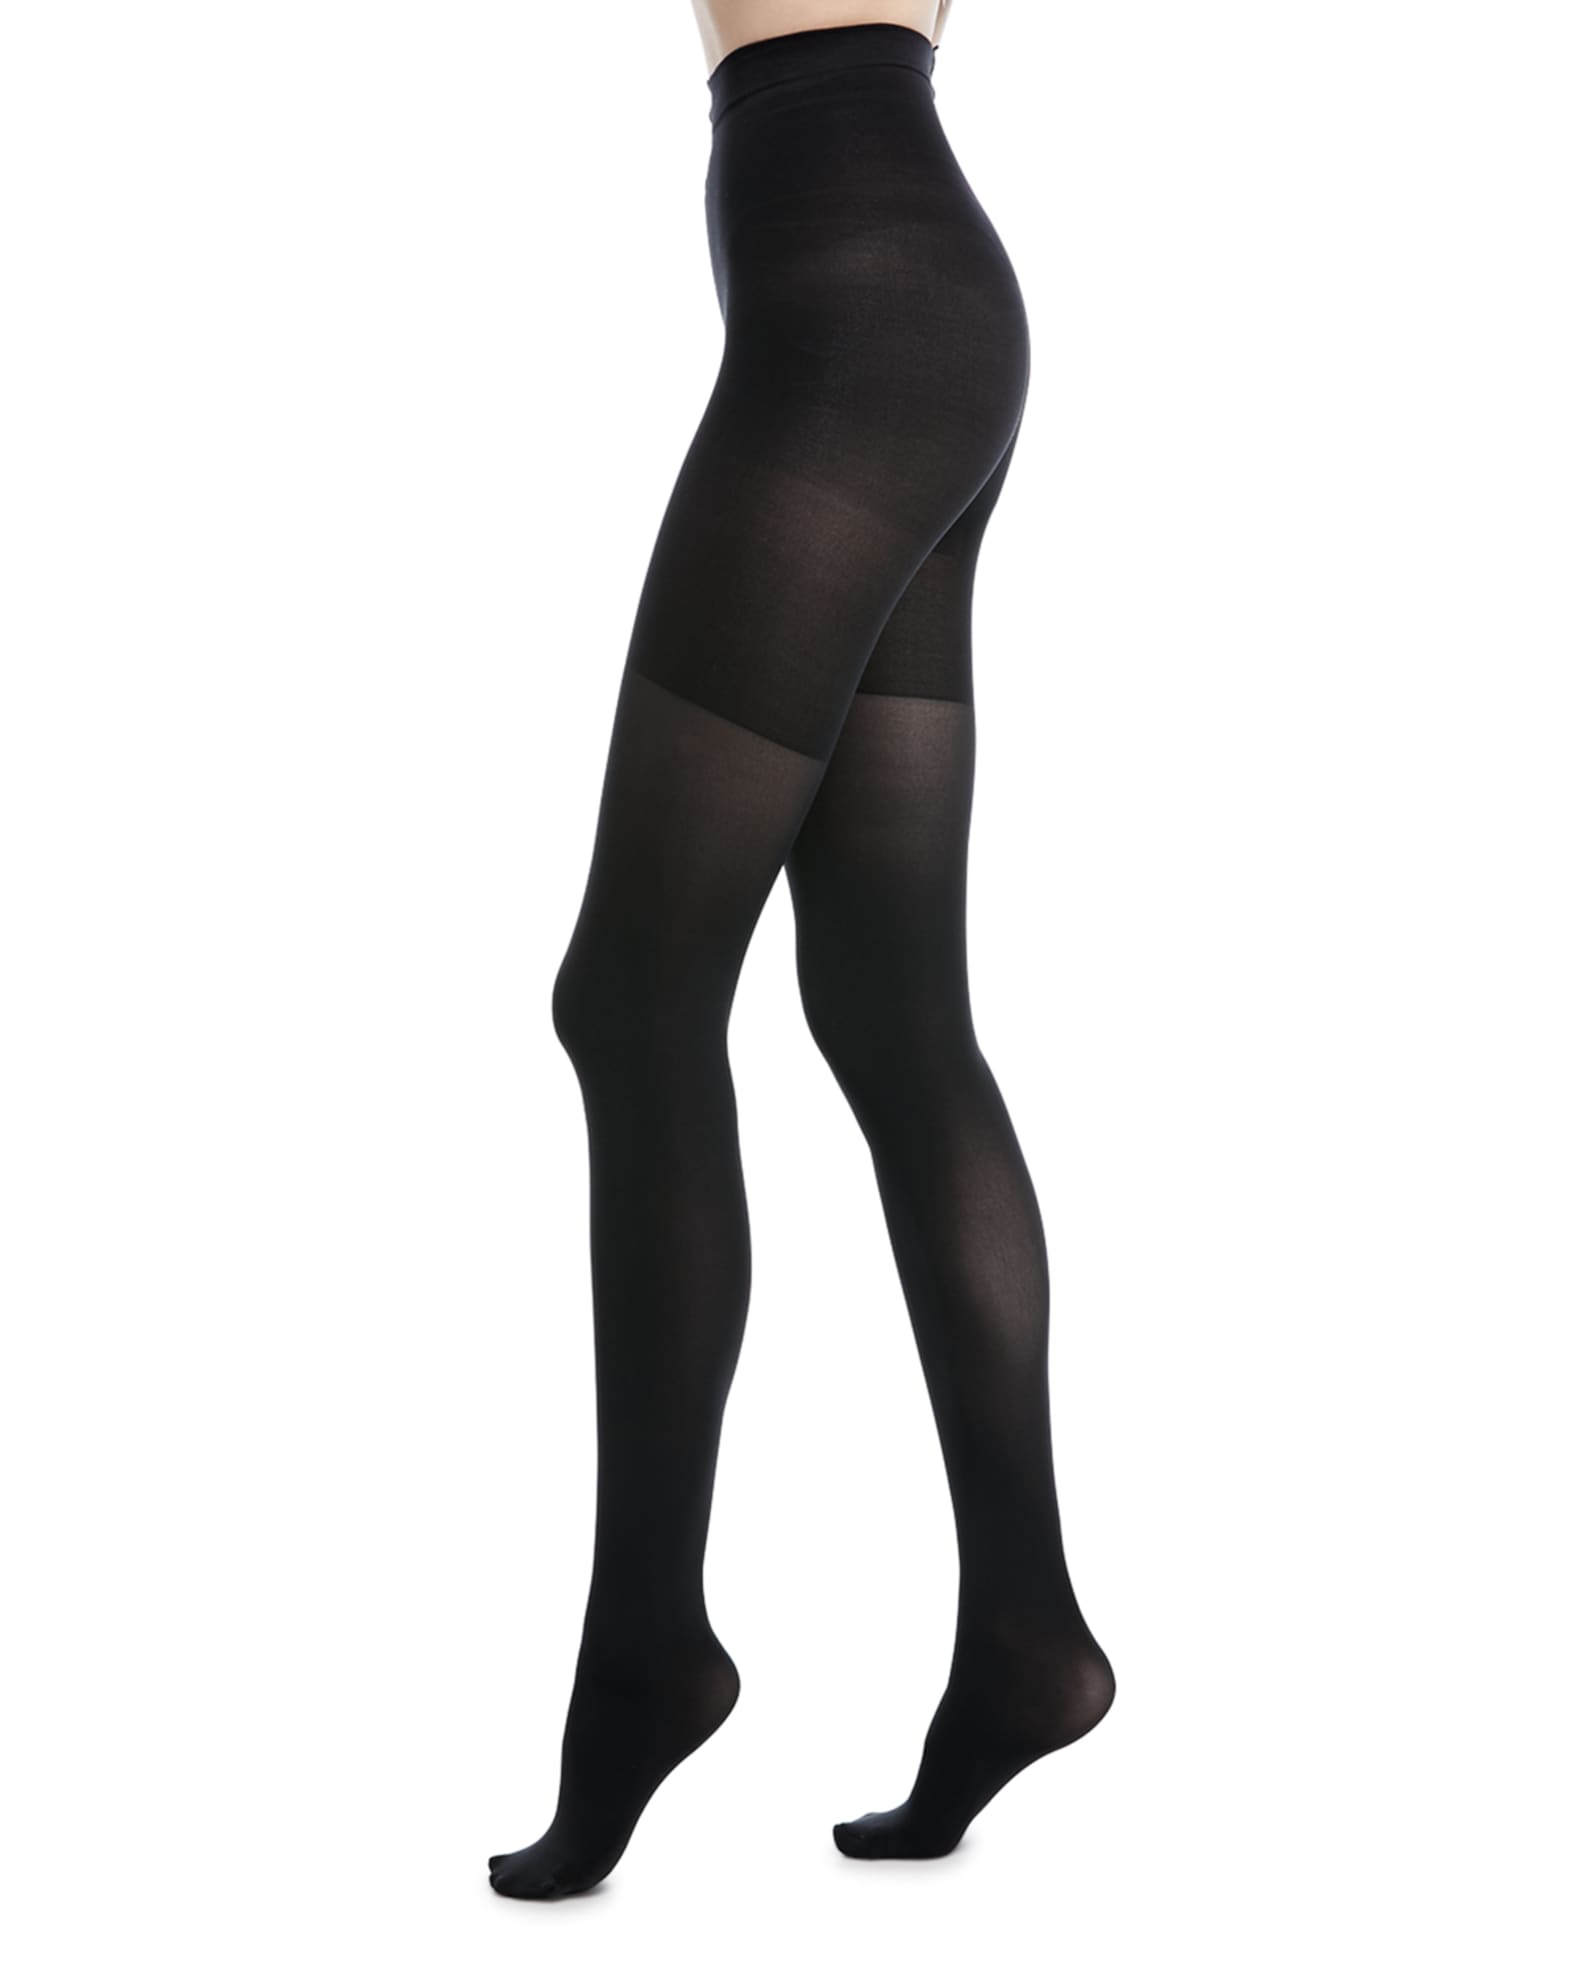 Spanx Luxe Leg Mid-Thigh Tights | Neiman Marcus